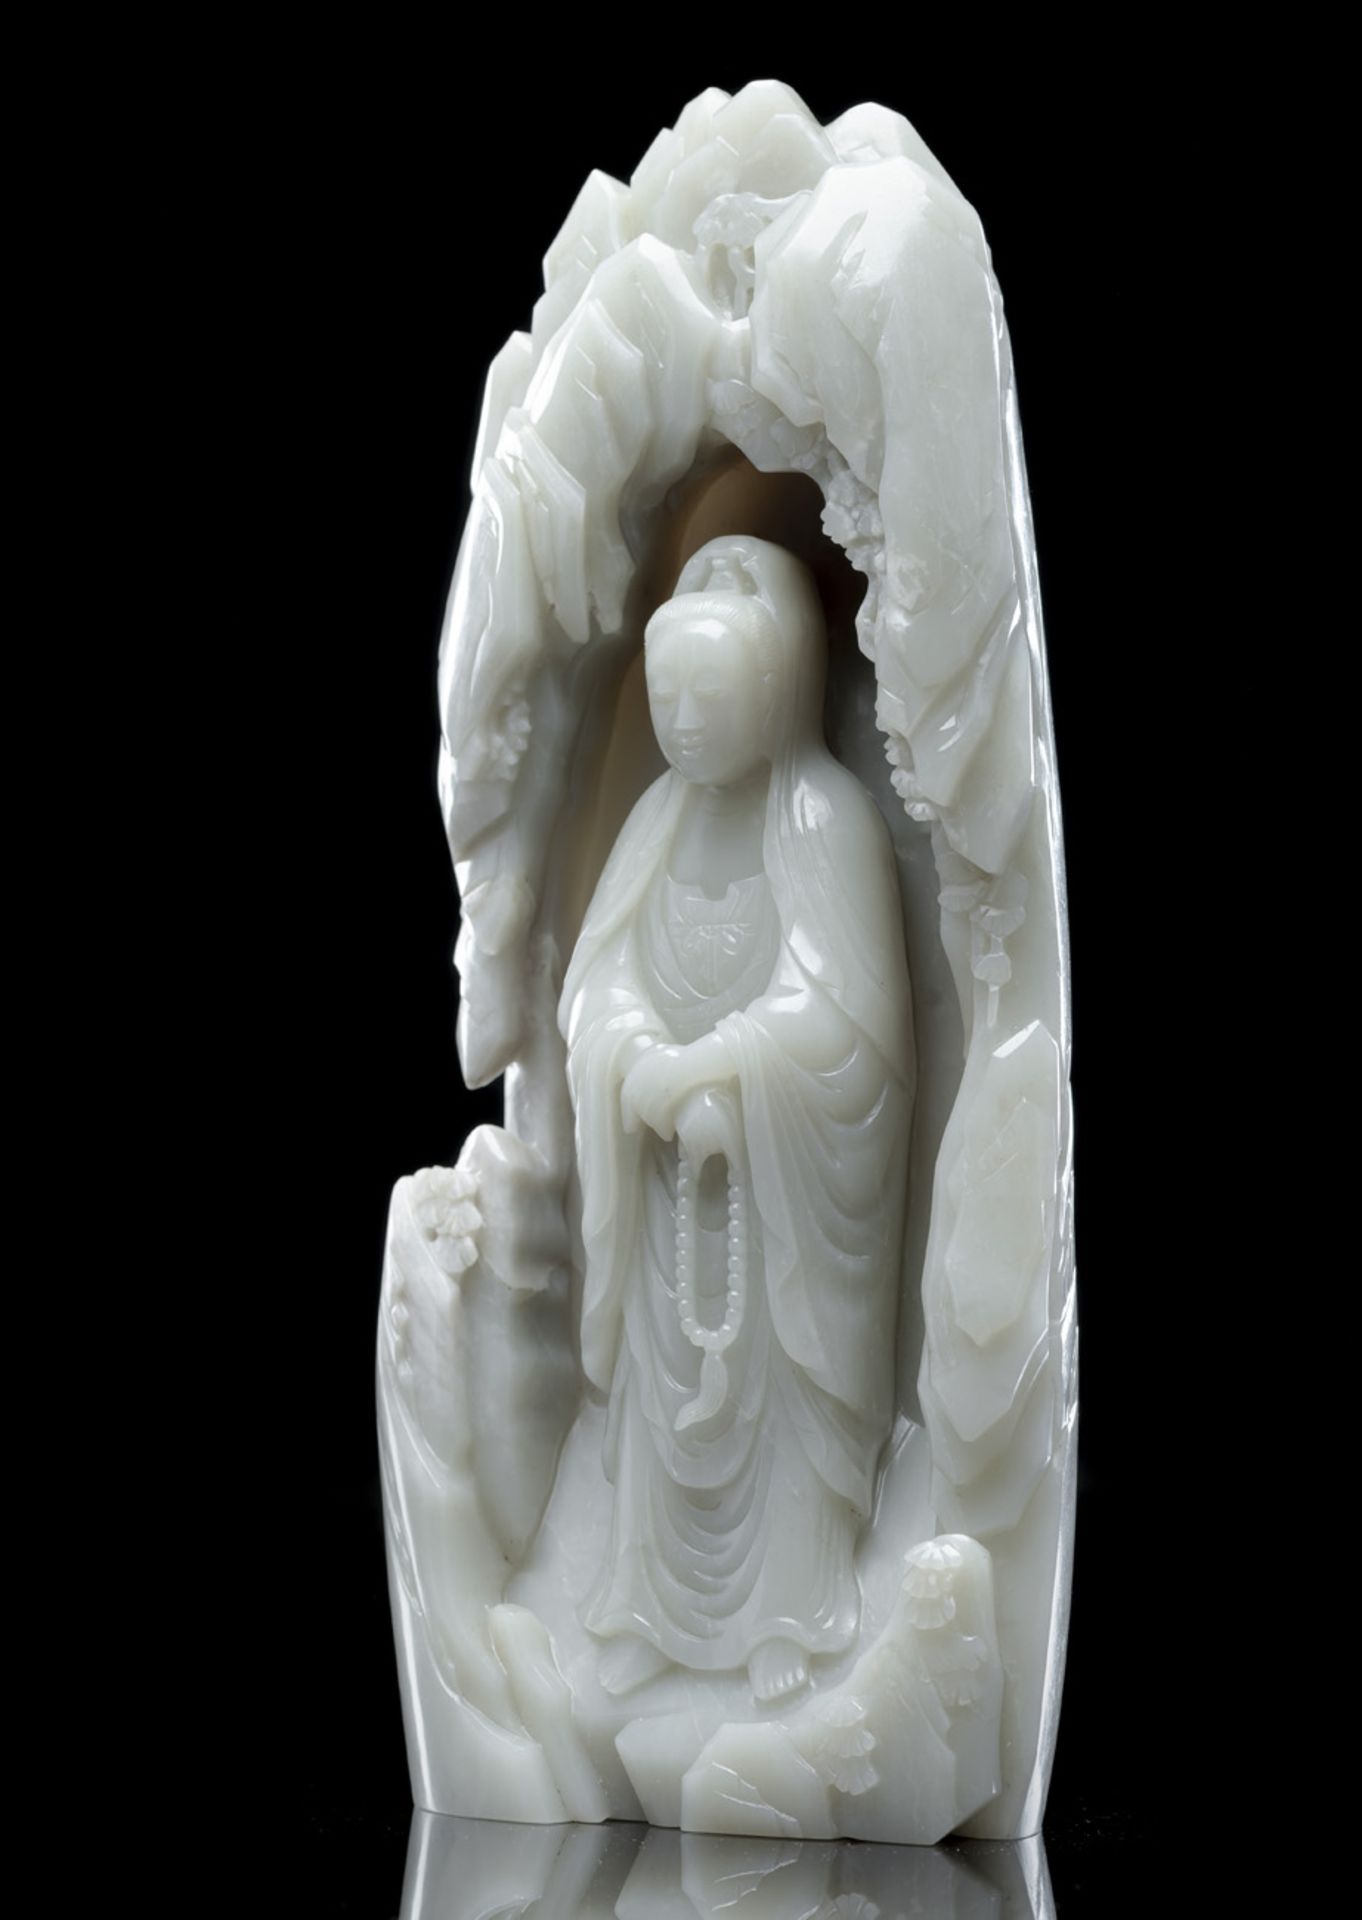 A RARE PALE CELADON JADE FIGURE OF GUANYIN IN A GROTTO - Image 3 of 6